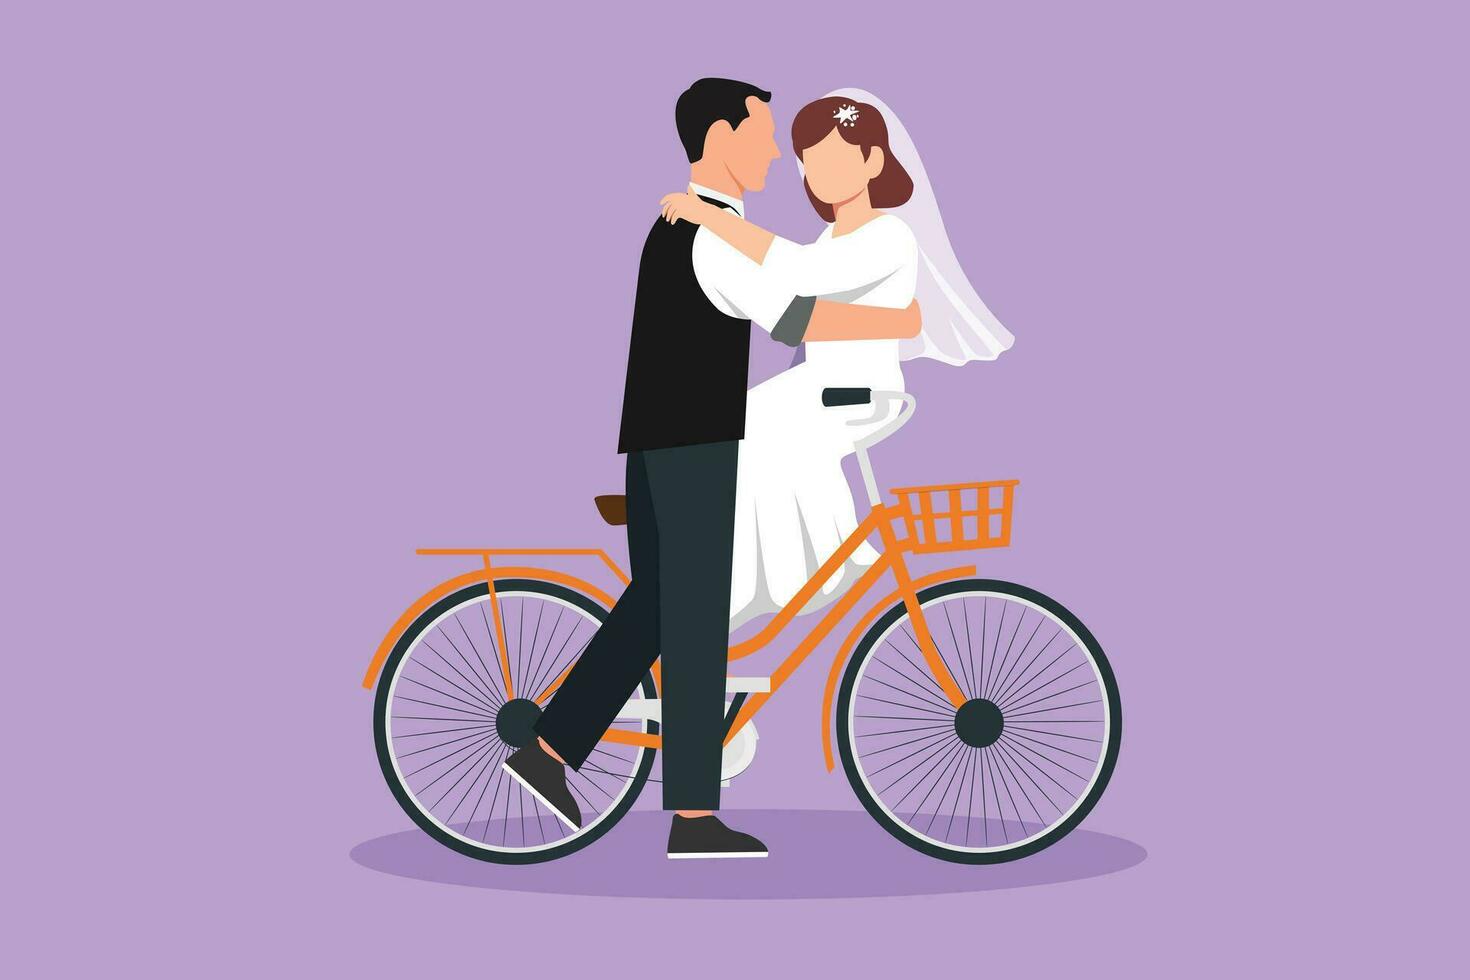 Graphic flat design drawing of loving married couple, man and woman sitting on bicycle and kissing. Romantic human relation, love story, newlywed family in honeymoon. Cartoon style vector illustration